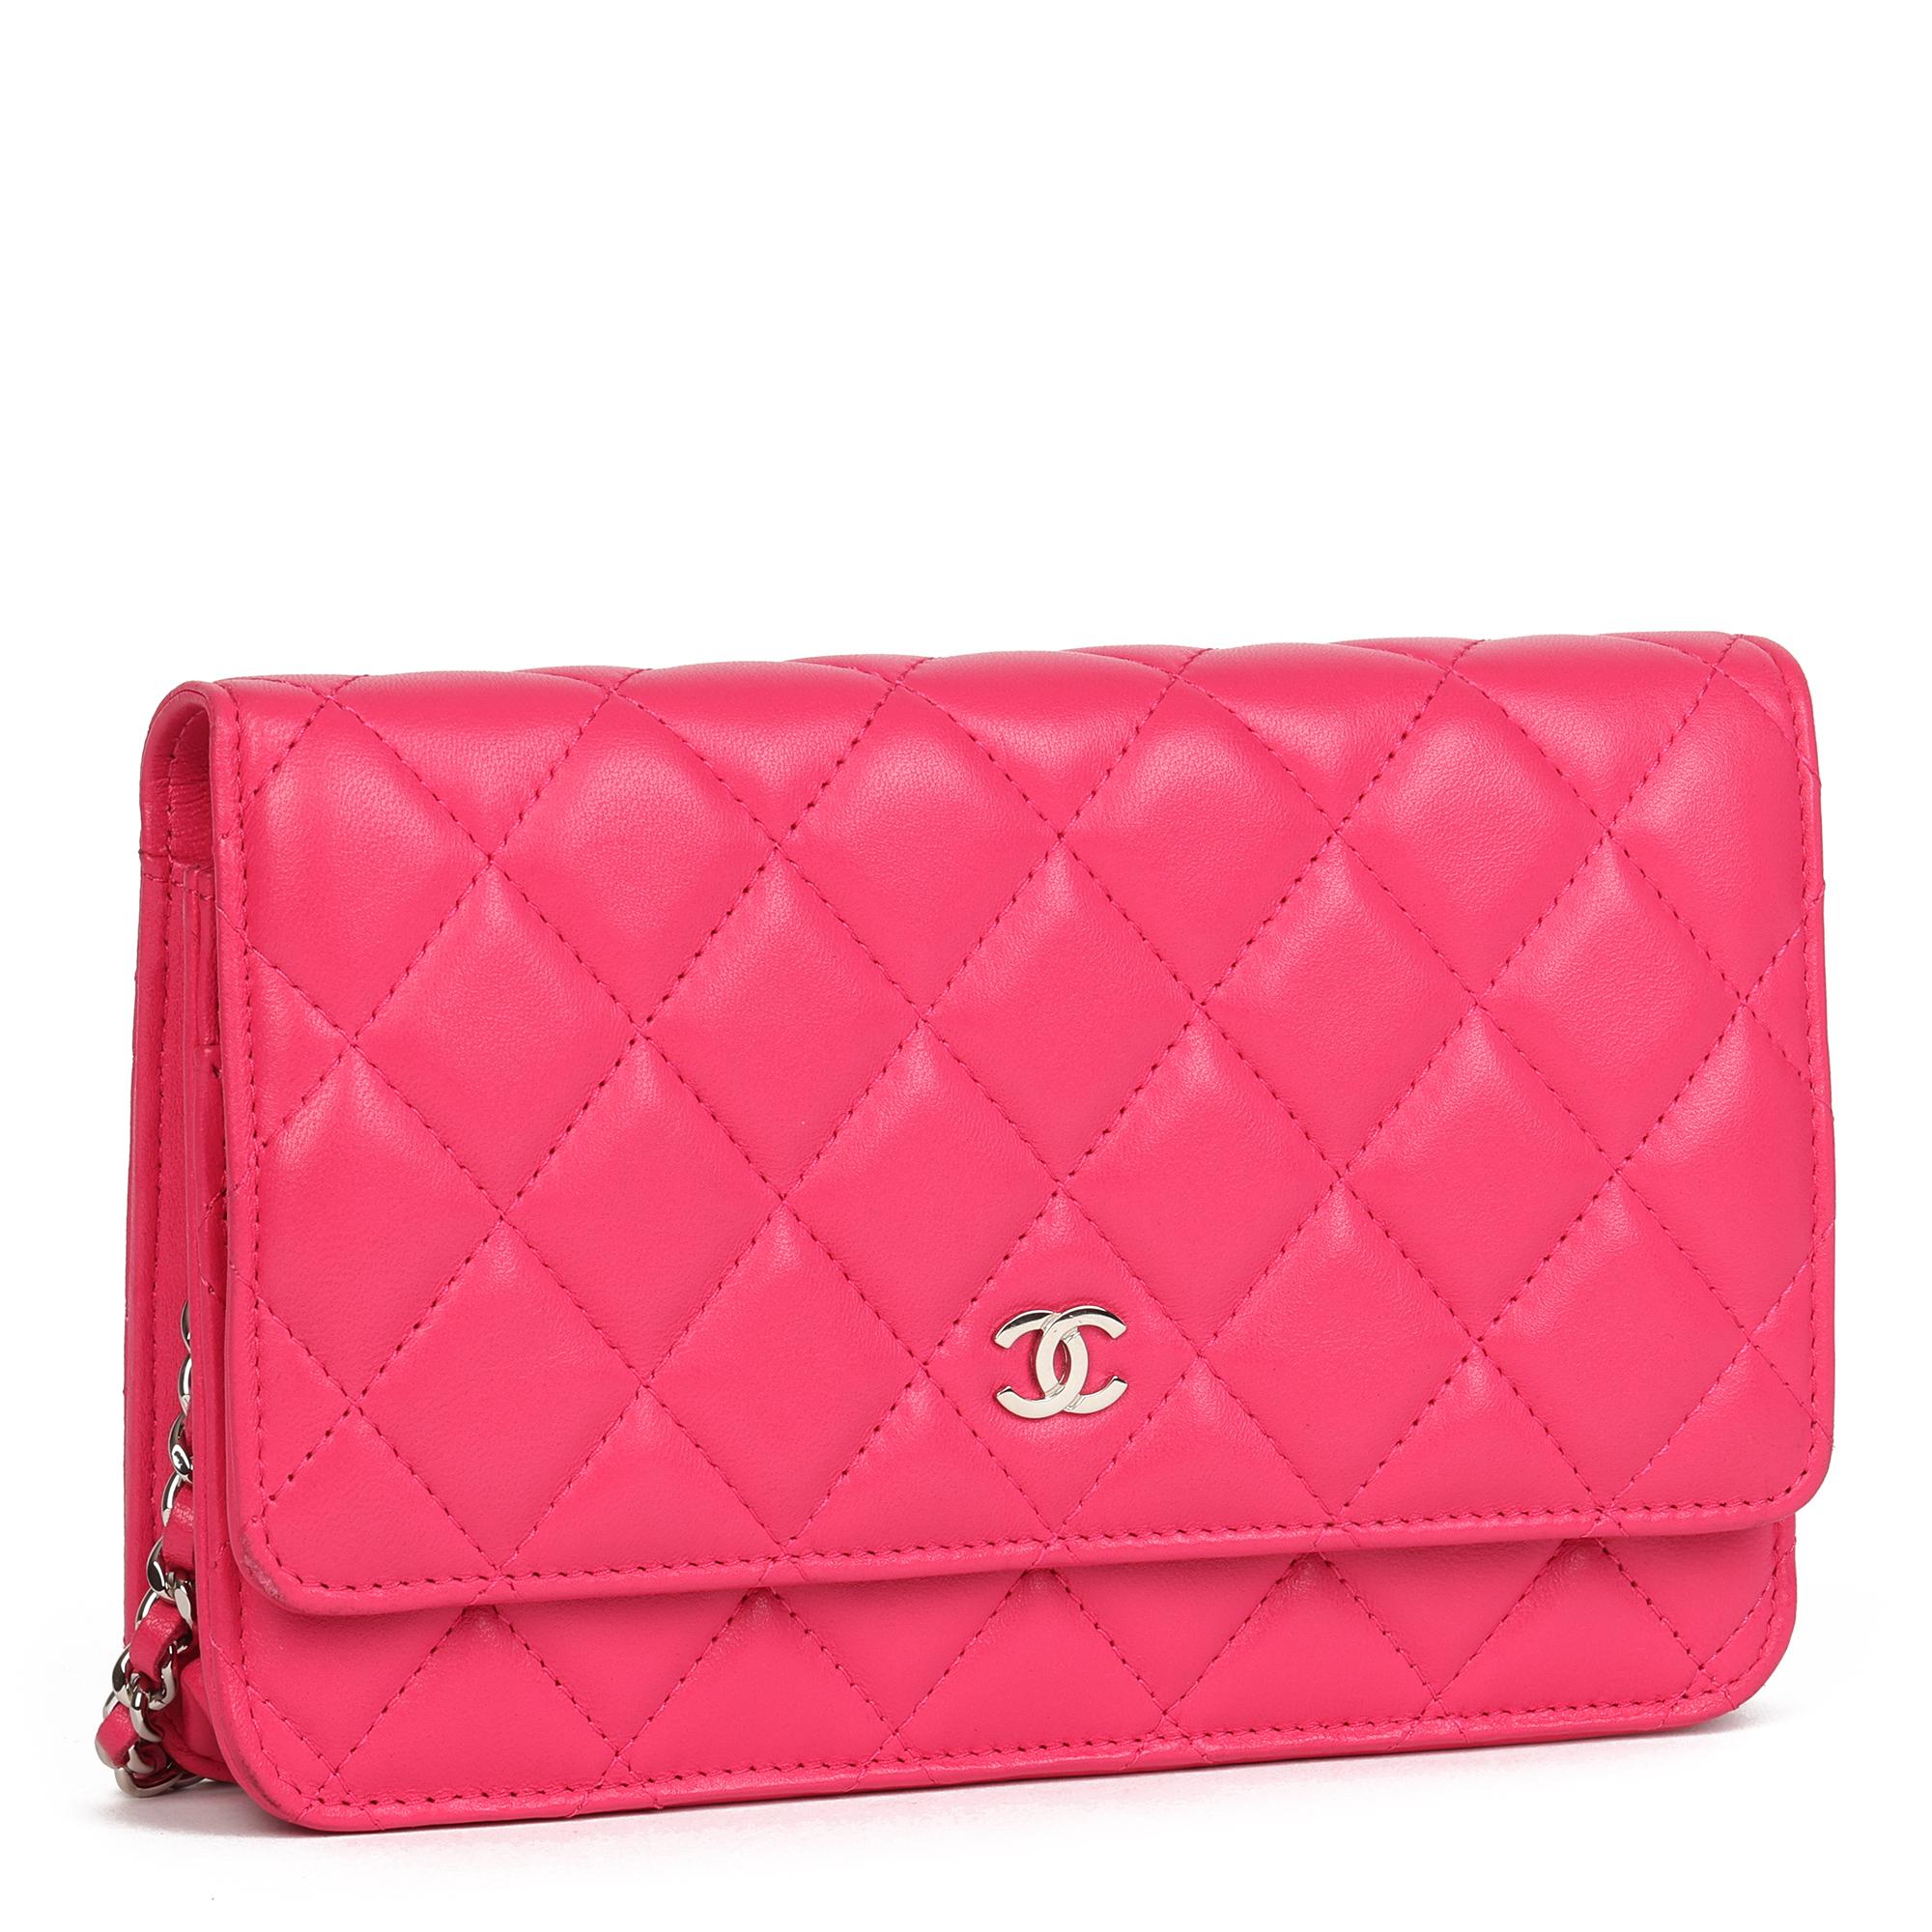 CHANEL
Pink Quilted Lambskin Wallet-on-Chain WOC

Xupes Reference: HB4044
Serial Number: 20030973
Age (Circa): 2015
Accompanied By: Chanel Dust Bag, Box, Authenticity Card 
Authenticity Details: Authenticity Card, Serial Sticker (Made in Italy)